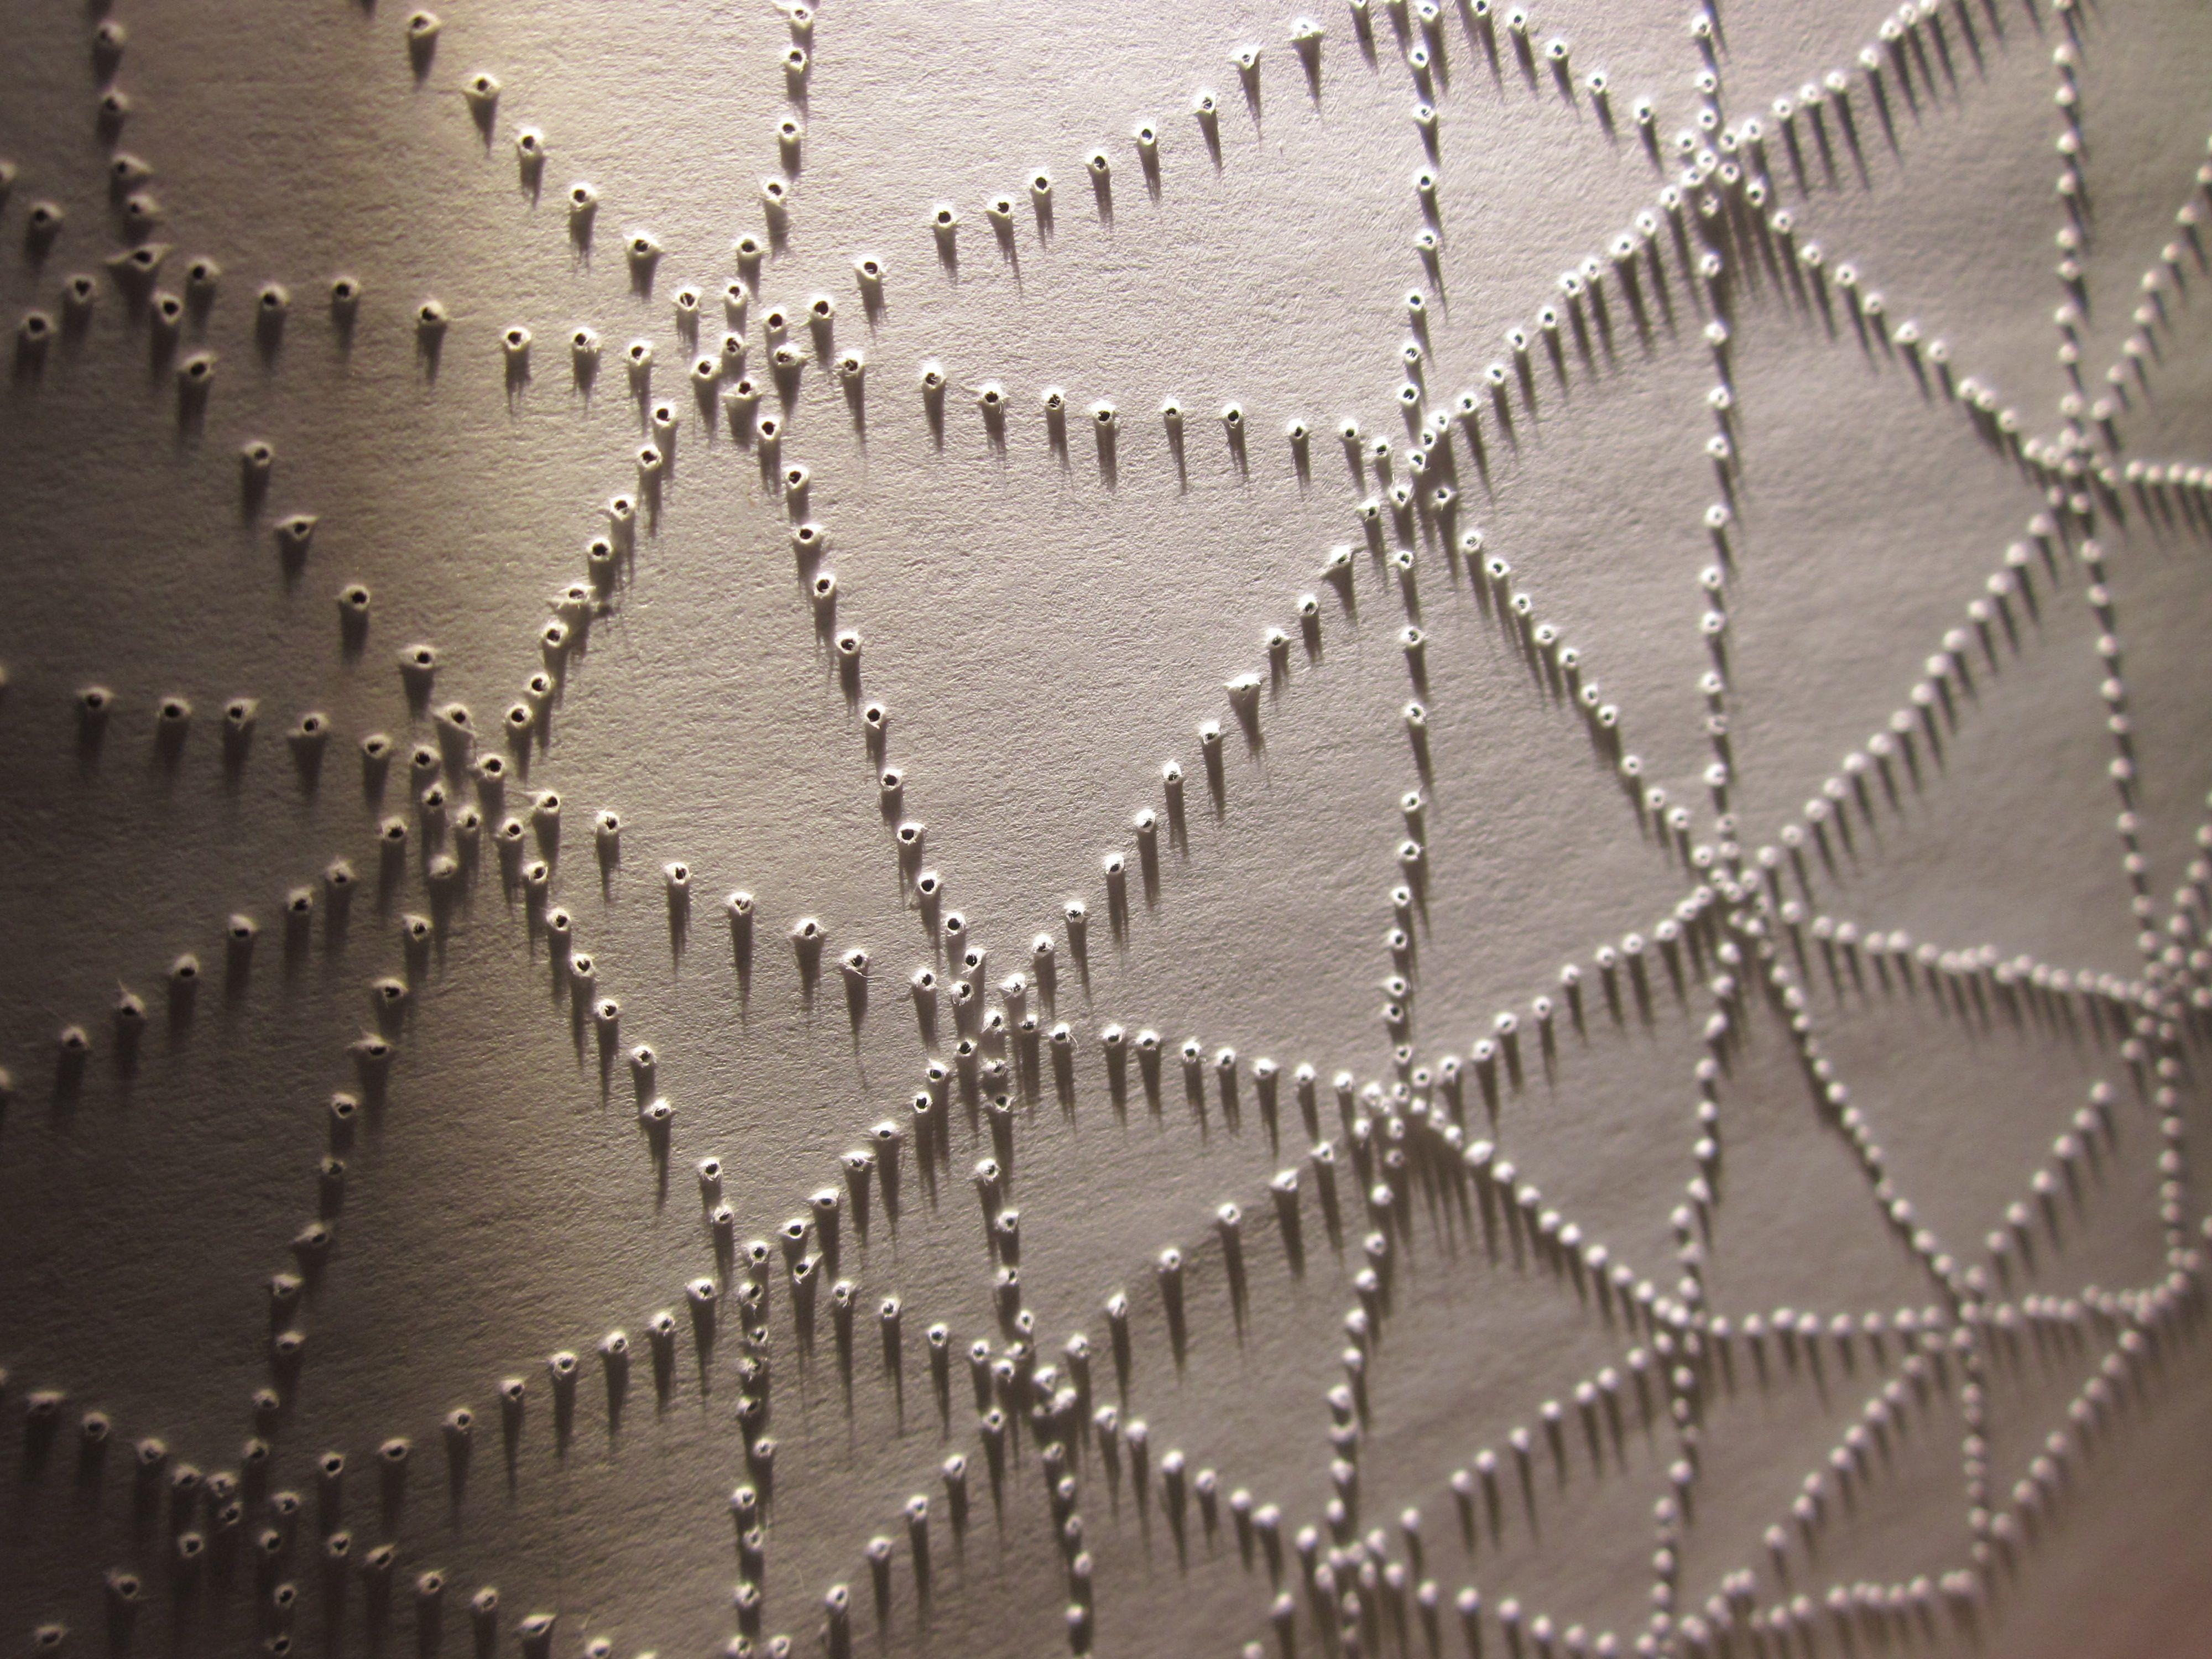 holes poked in paper in triangle pattern